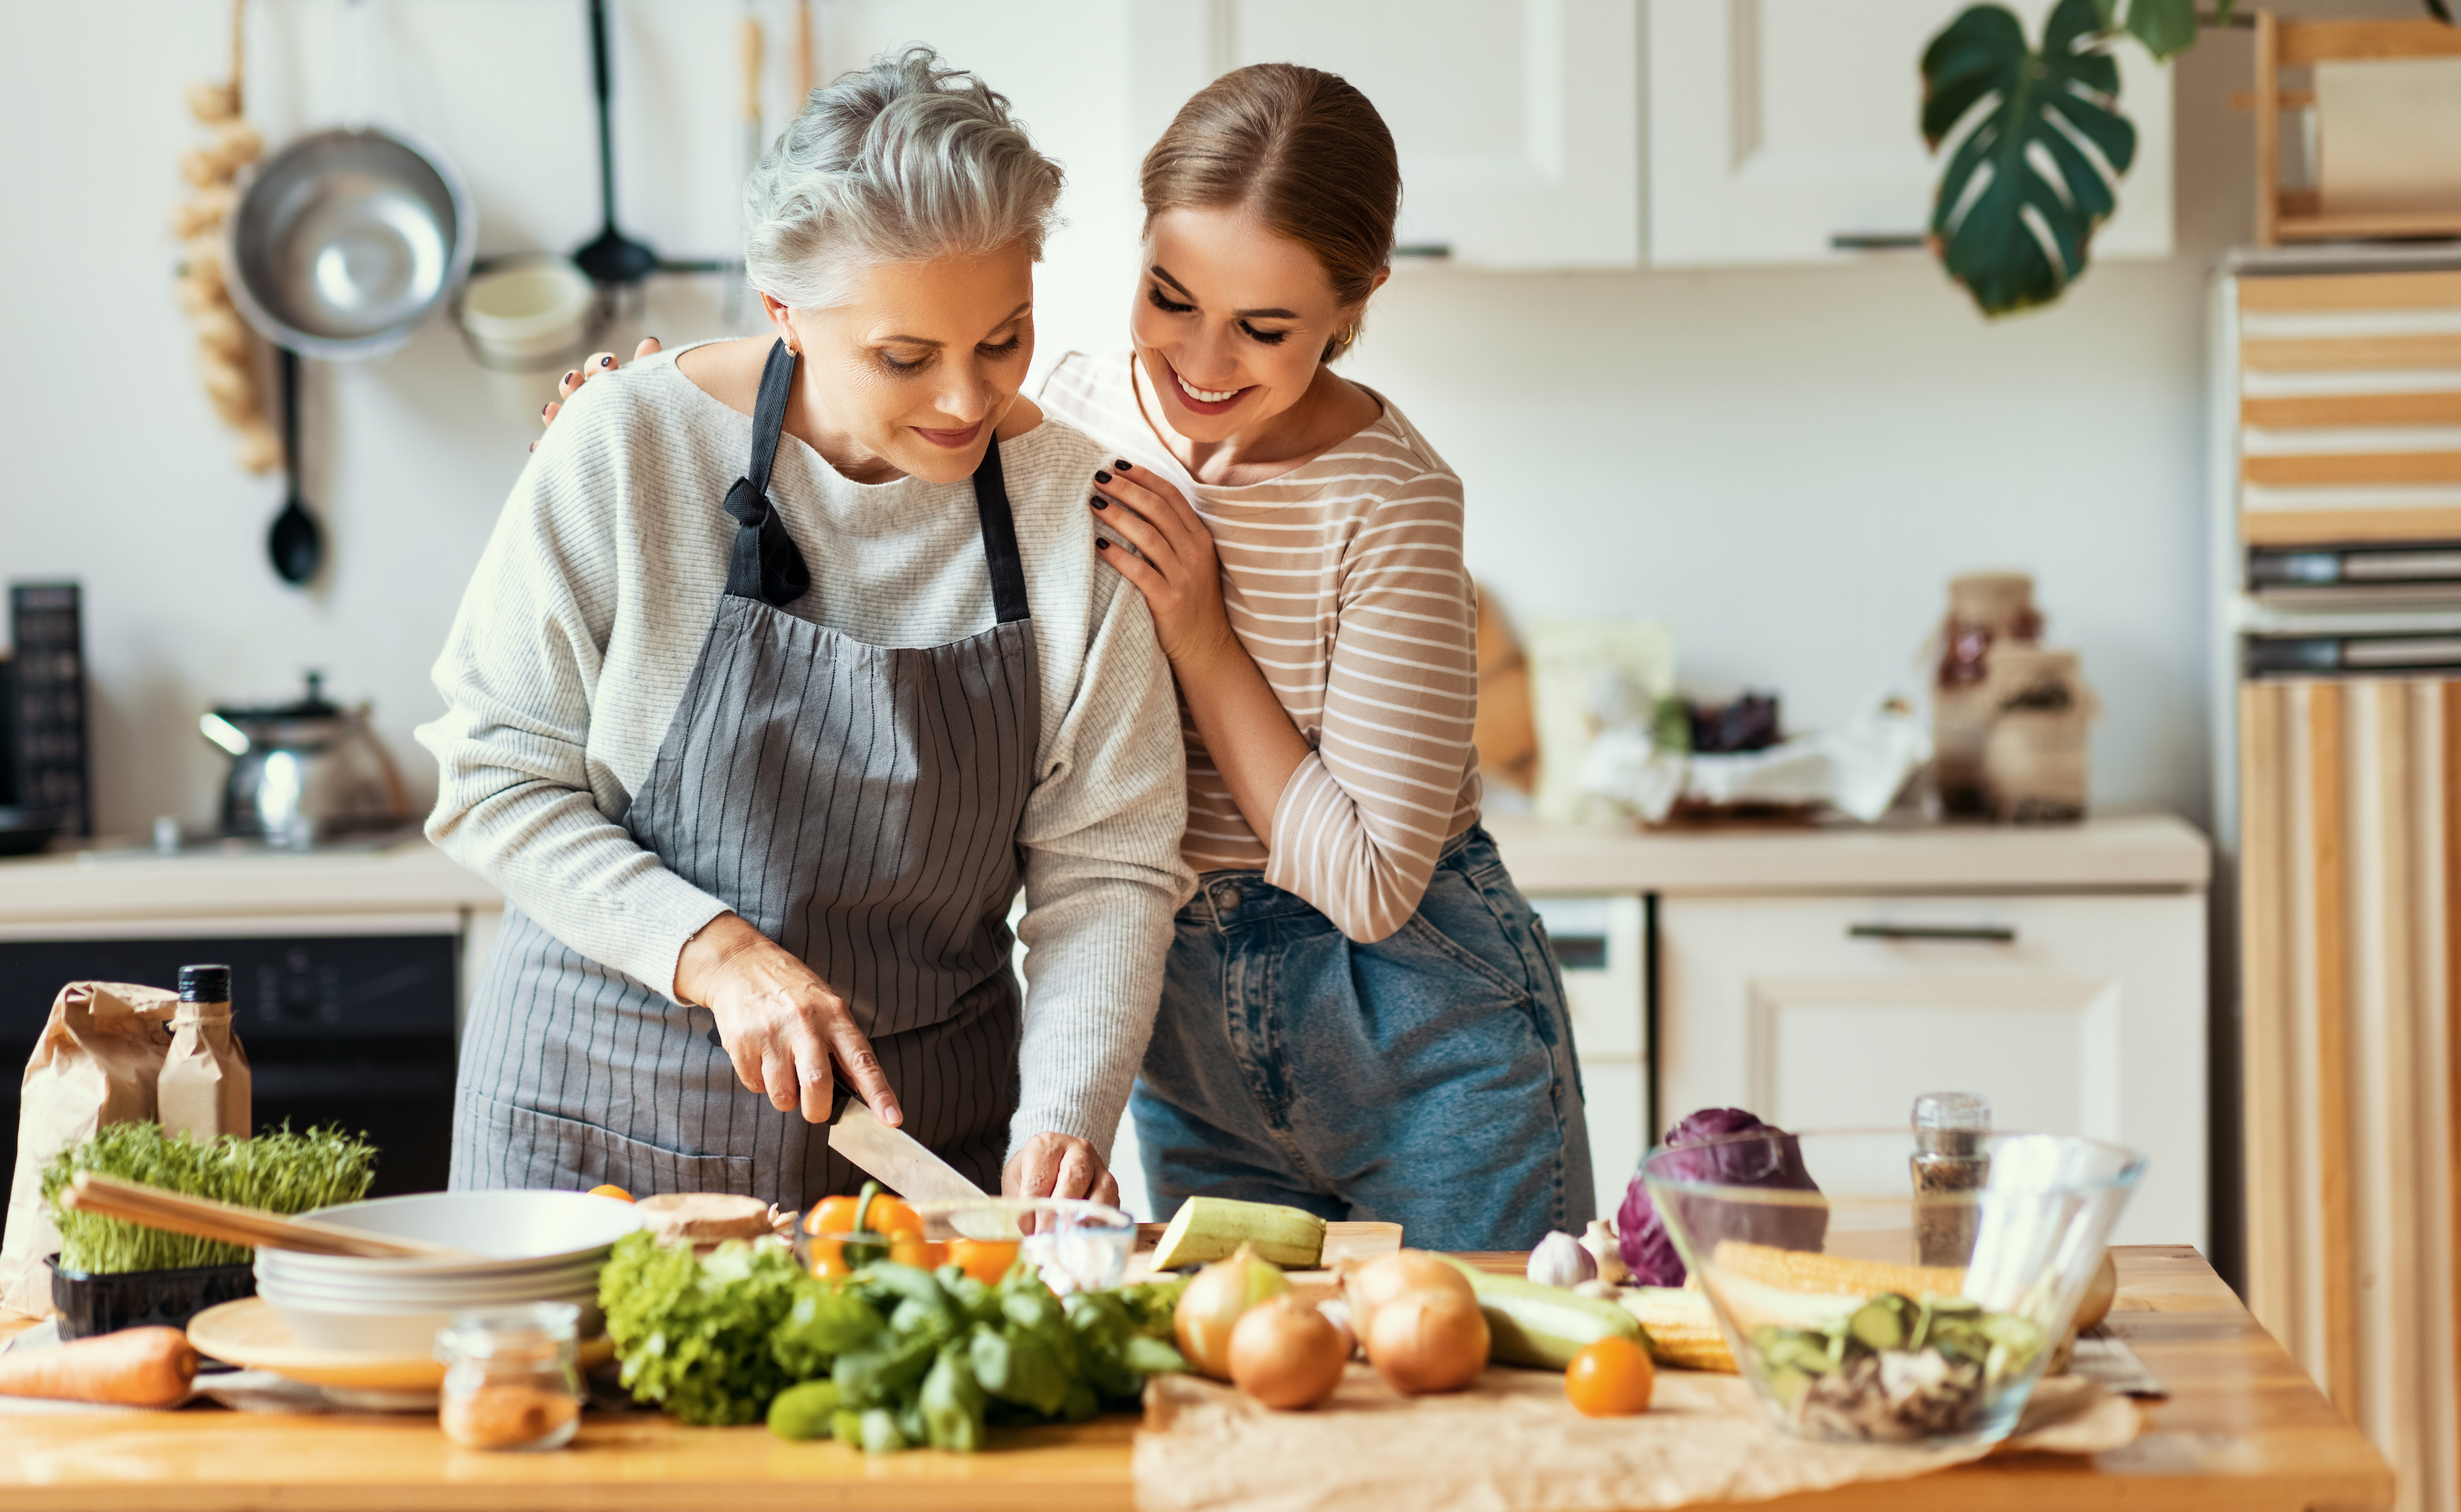 An elderly woman and her friend cook together after the friend agrees to become executor. When selecting an executor, consider their personal qualities and capabilities. 